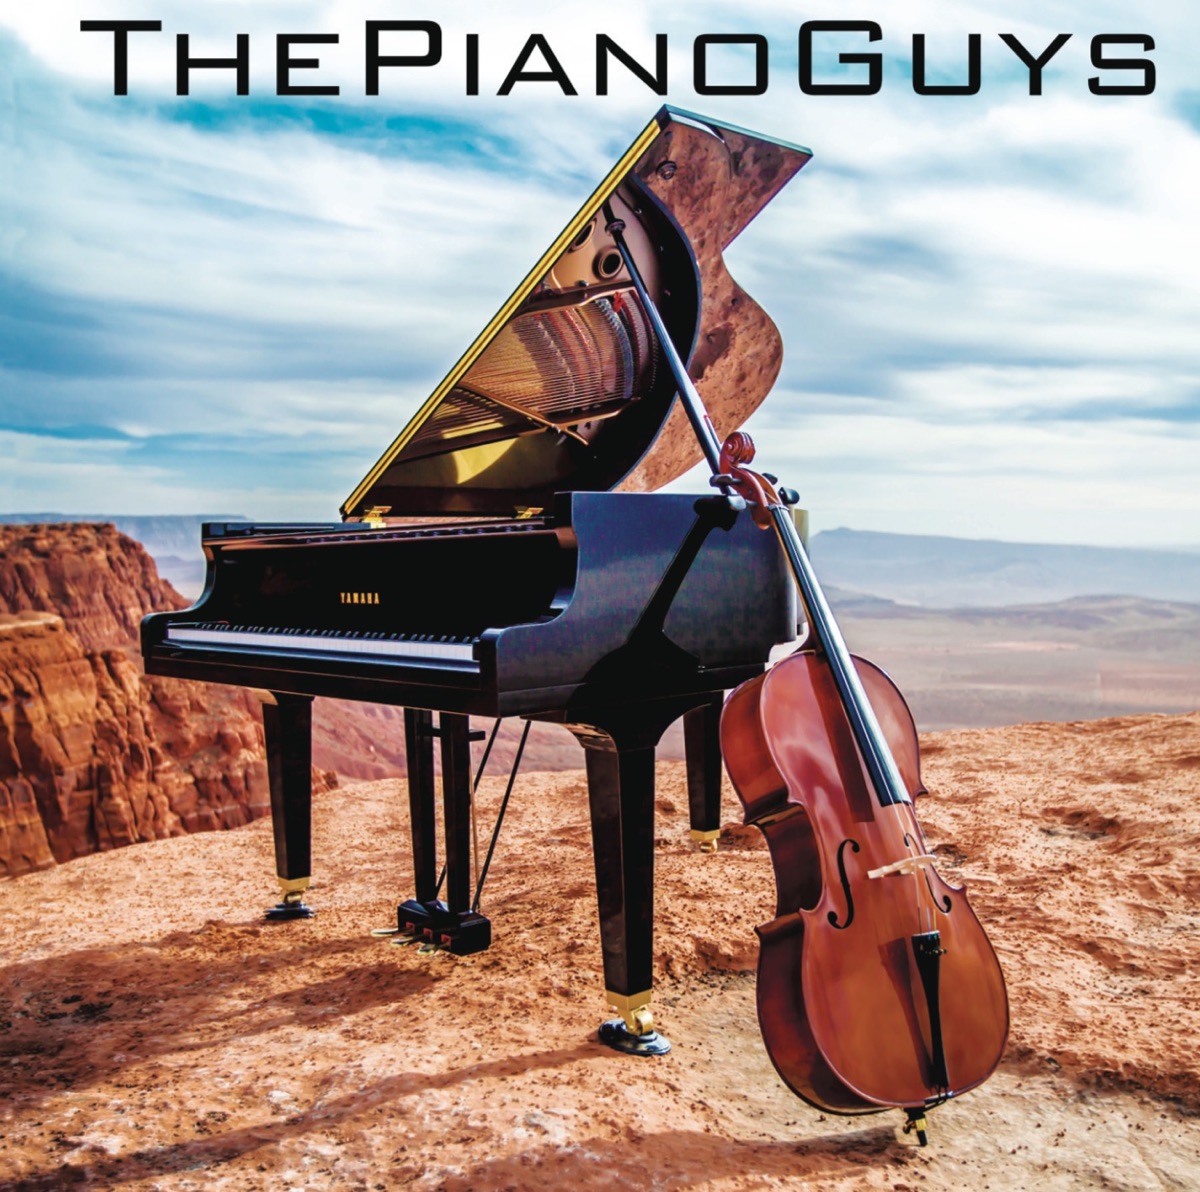 Jurassic Park Theme - Single by The Piano Guys on Apple Music